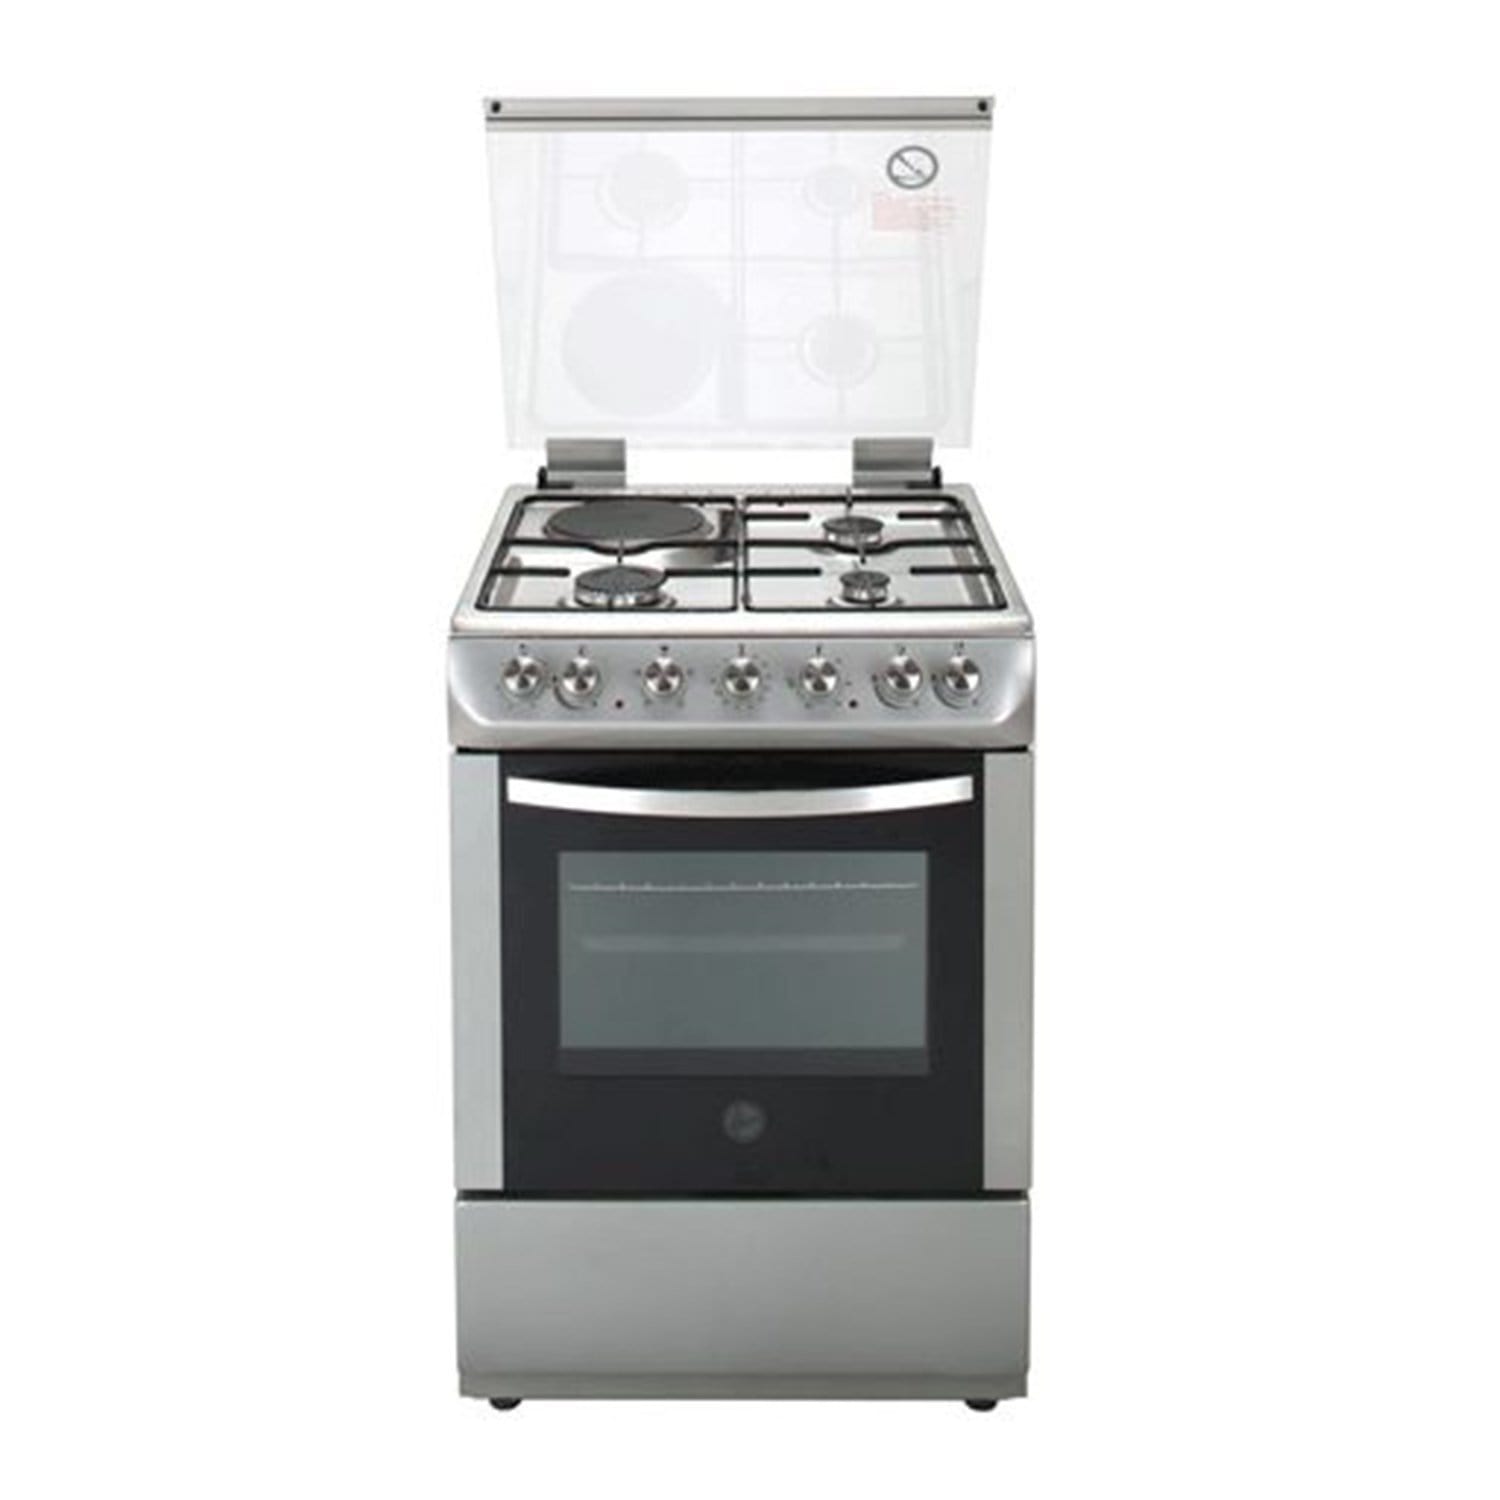 Hoover Gas Cooker with Electric Oven - Silver - MGC60.00S - Jashanmal Home